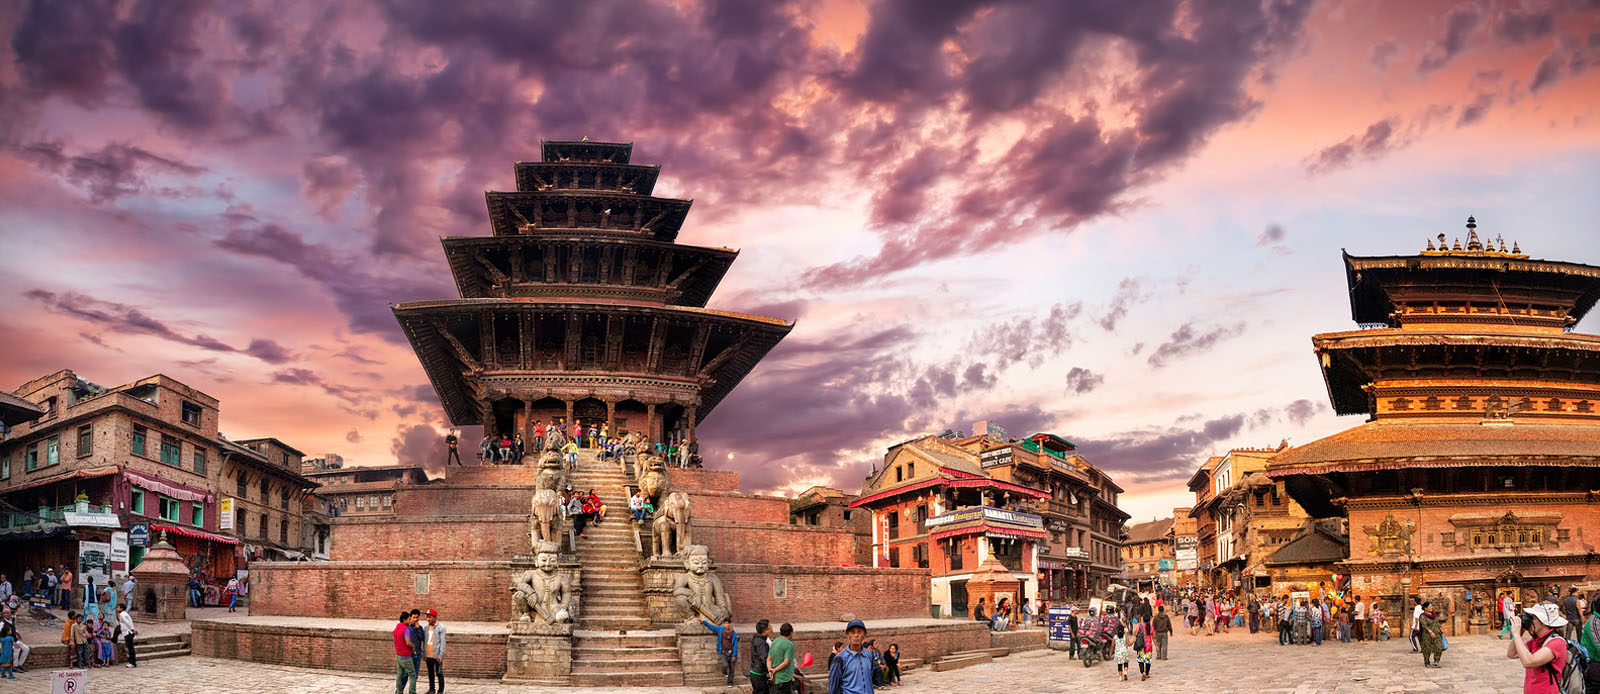 europe tour packages from nepal